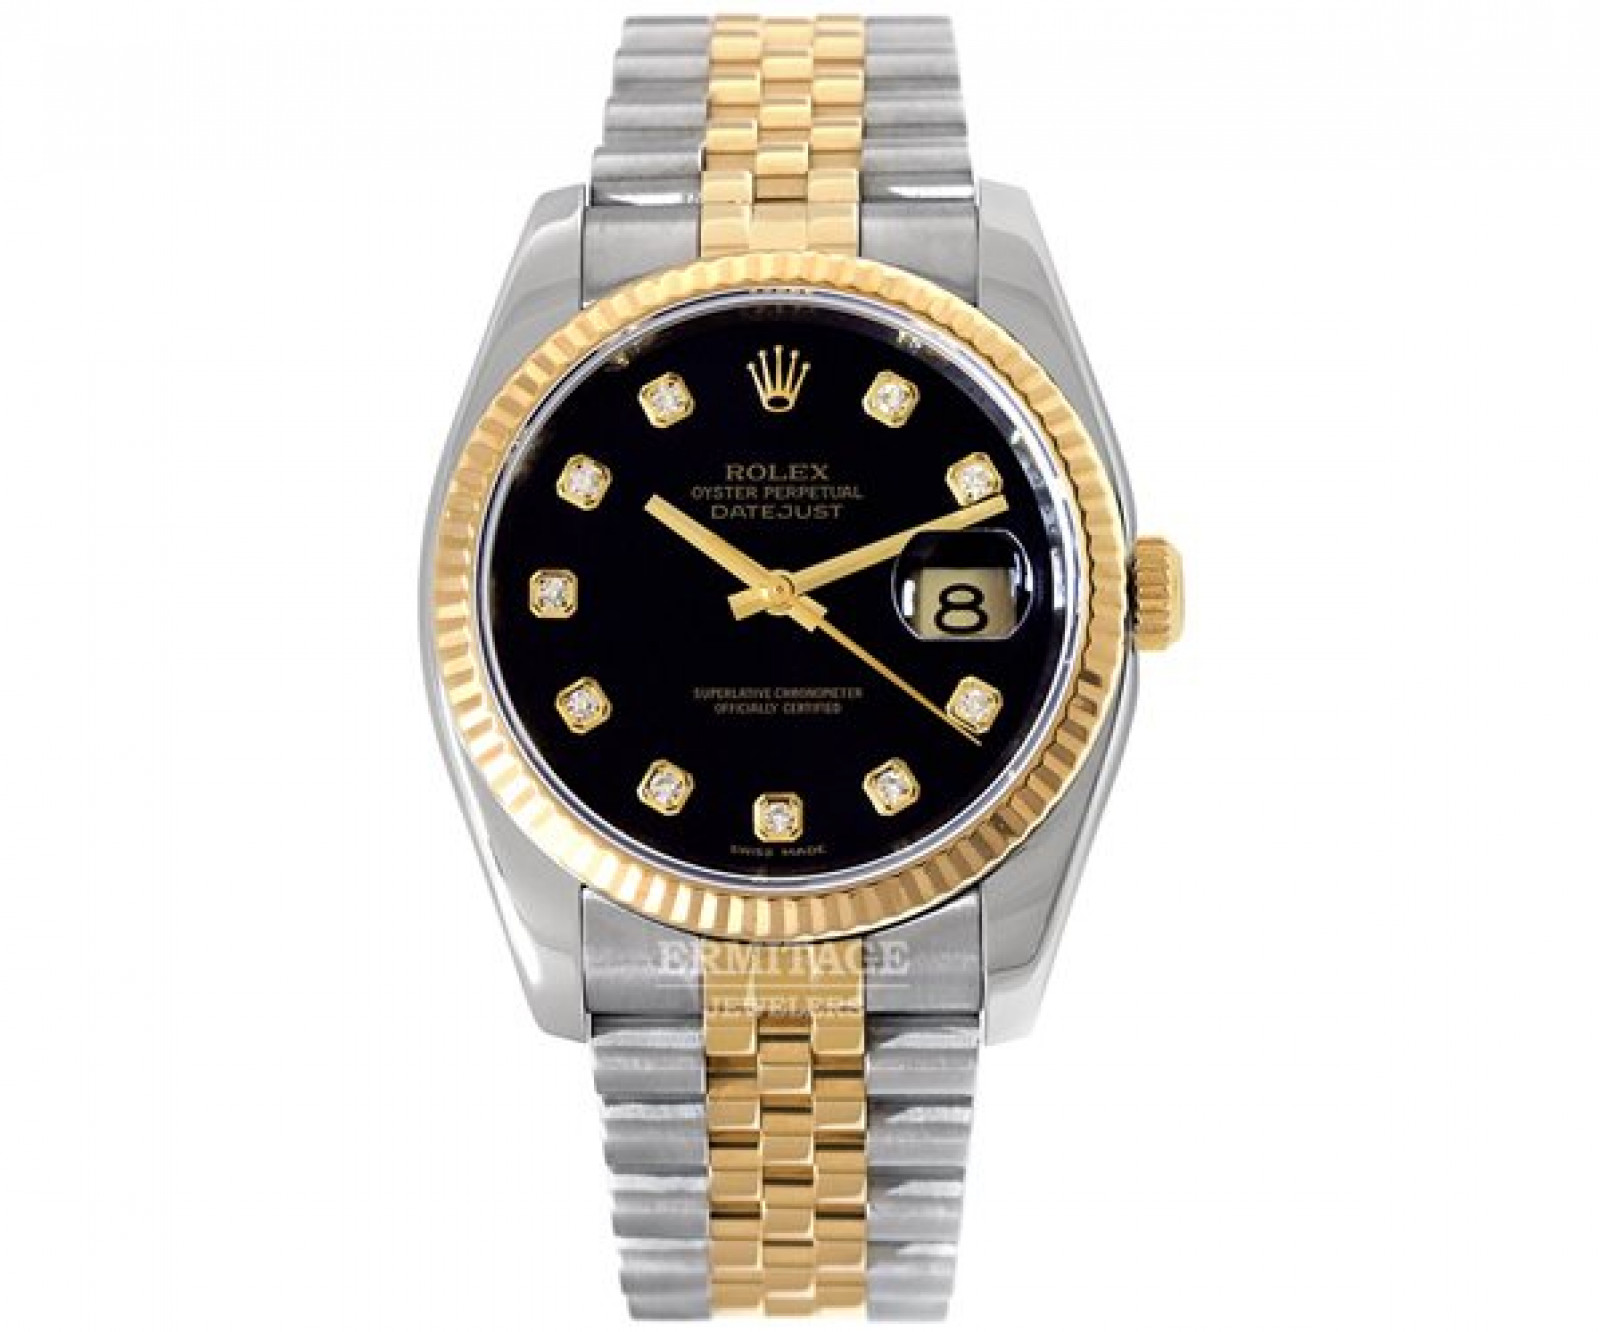 Pre-Owned Two Tone Rolex Datejust 116233 with Diamonds